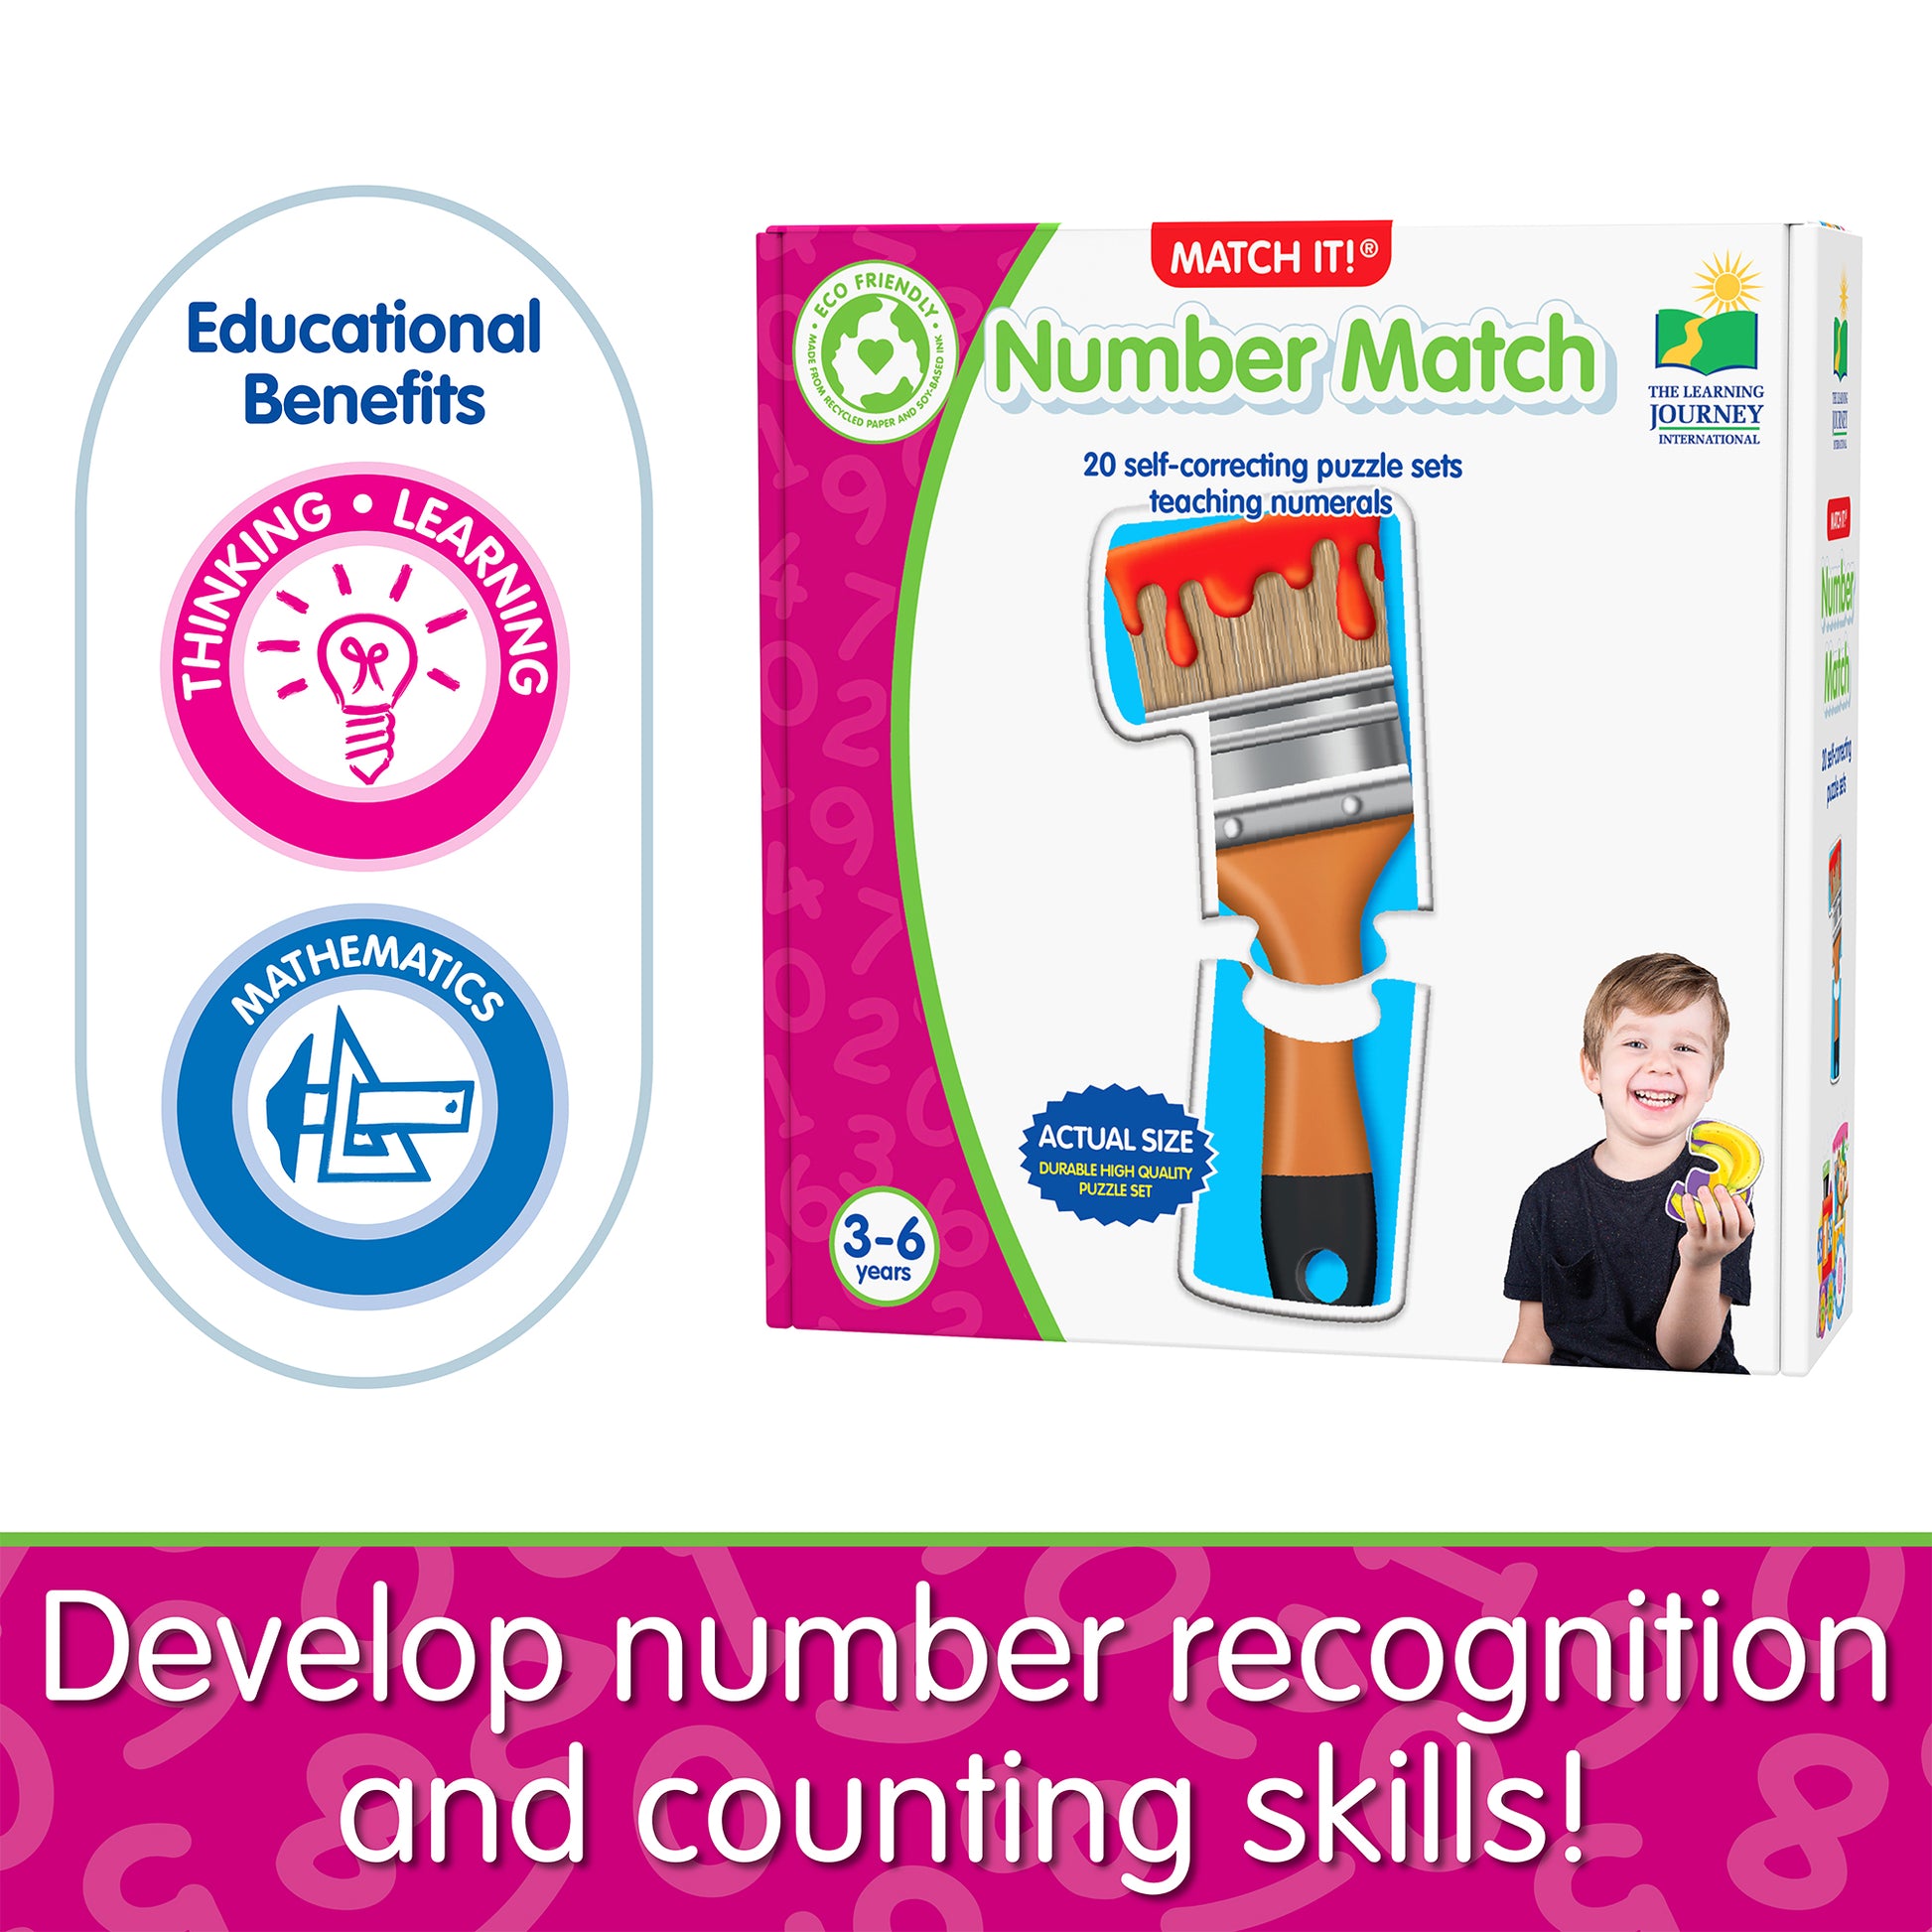 Infographic about Number Match's educational benefits